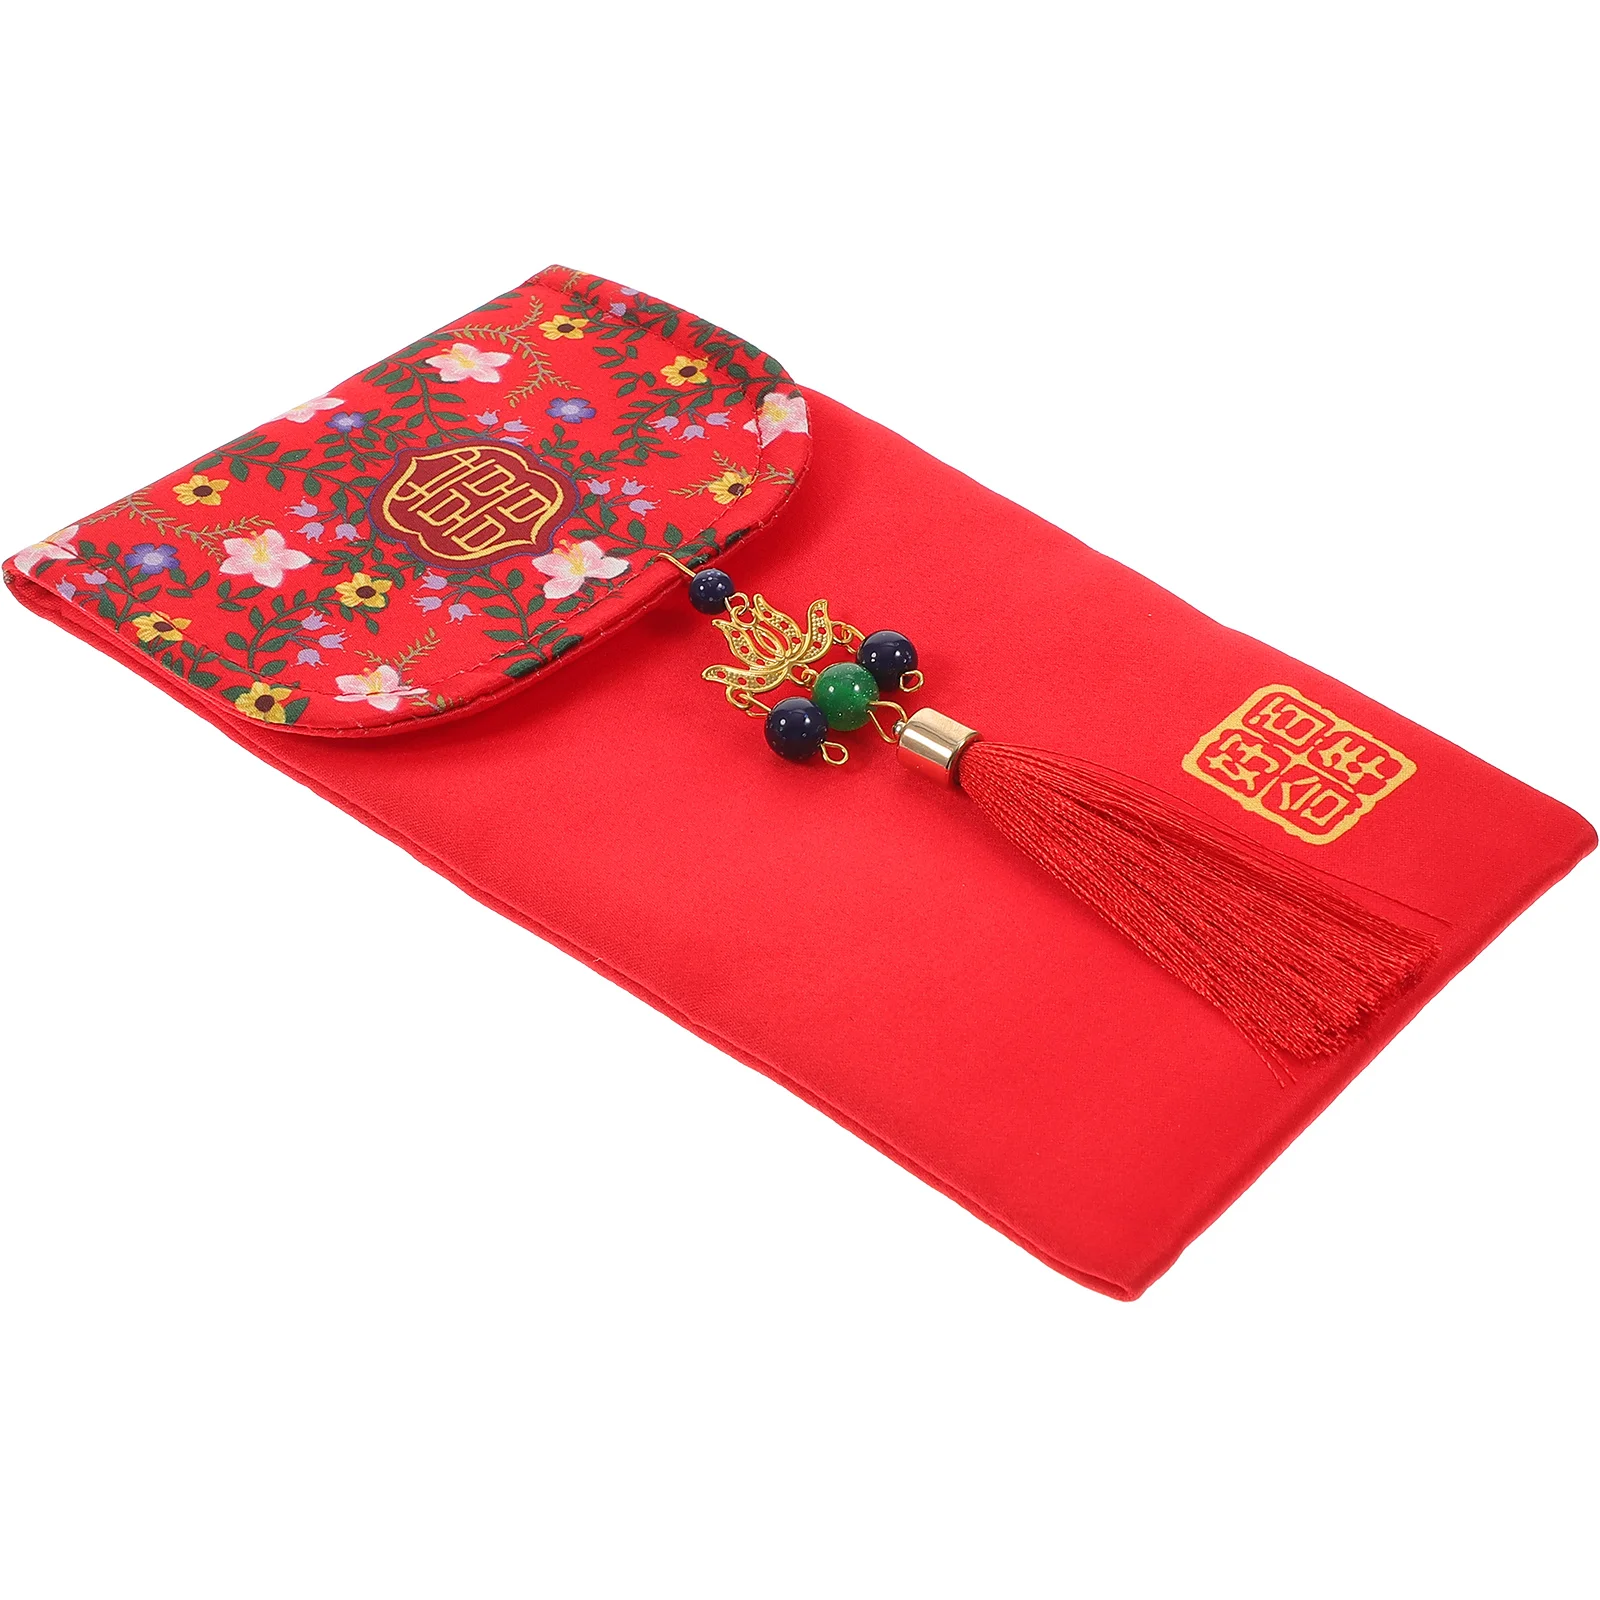 

Xi Character Fabric Red Envelope Chinese Hong Bao Wedding Decor Money Packet Supplies Style Purses